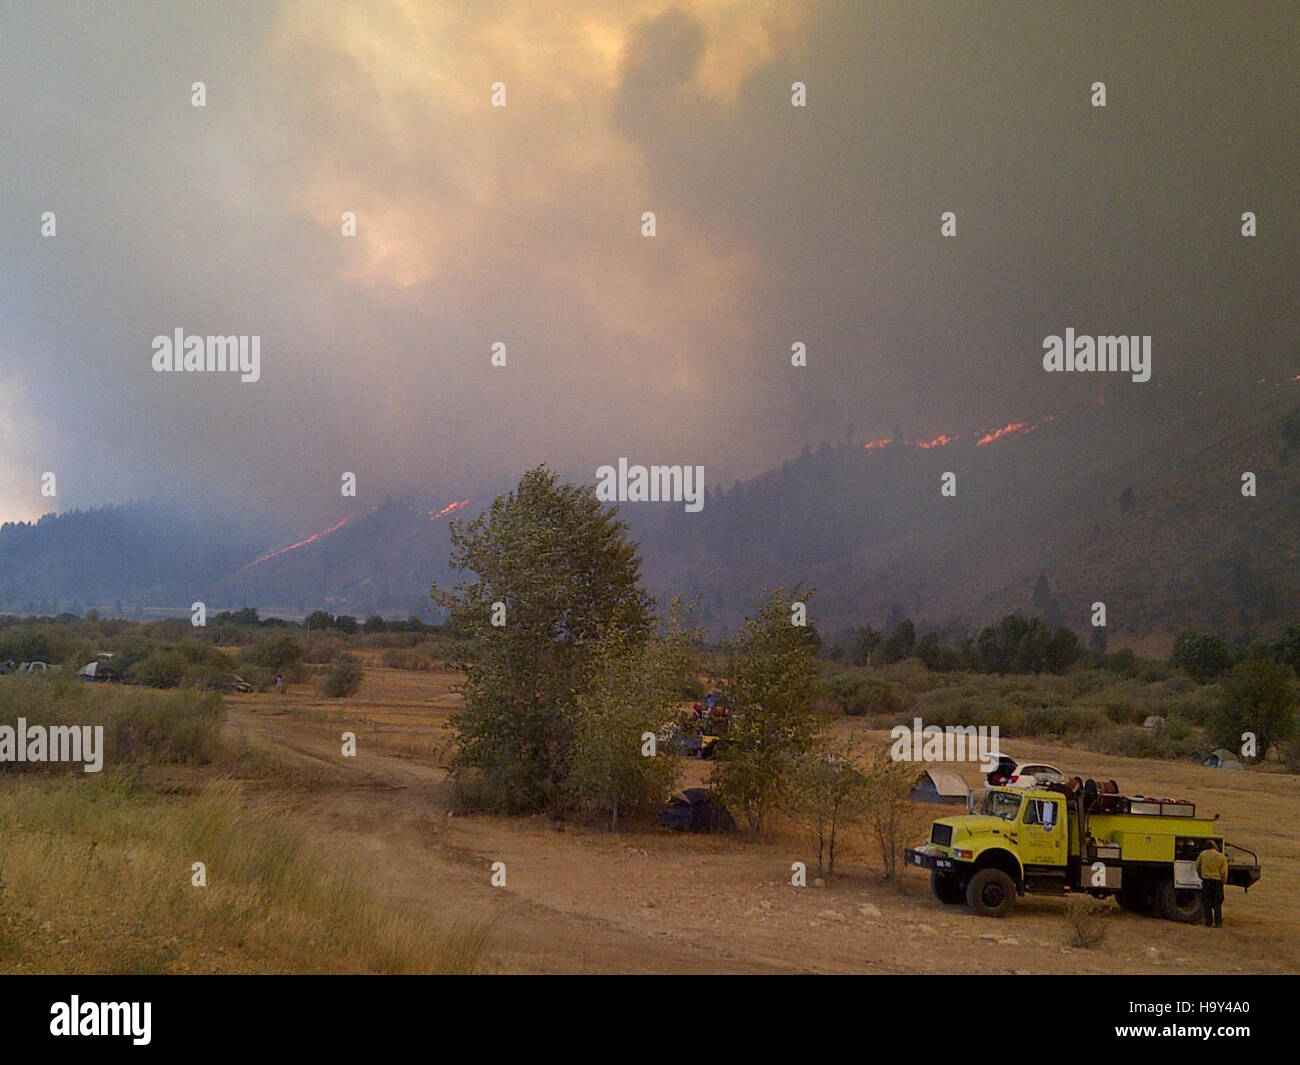 Elk Complex Fire Forest Fires Stock Photo